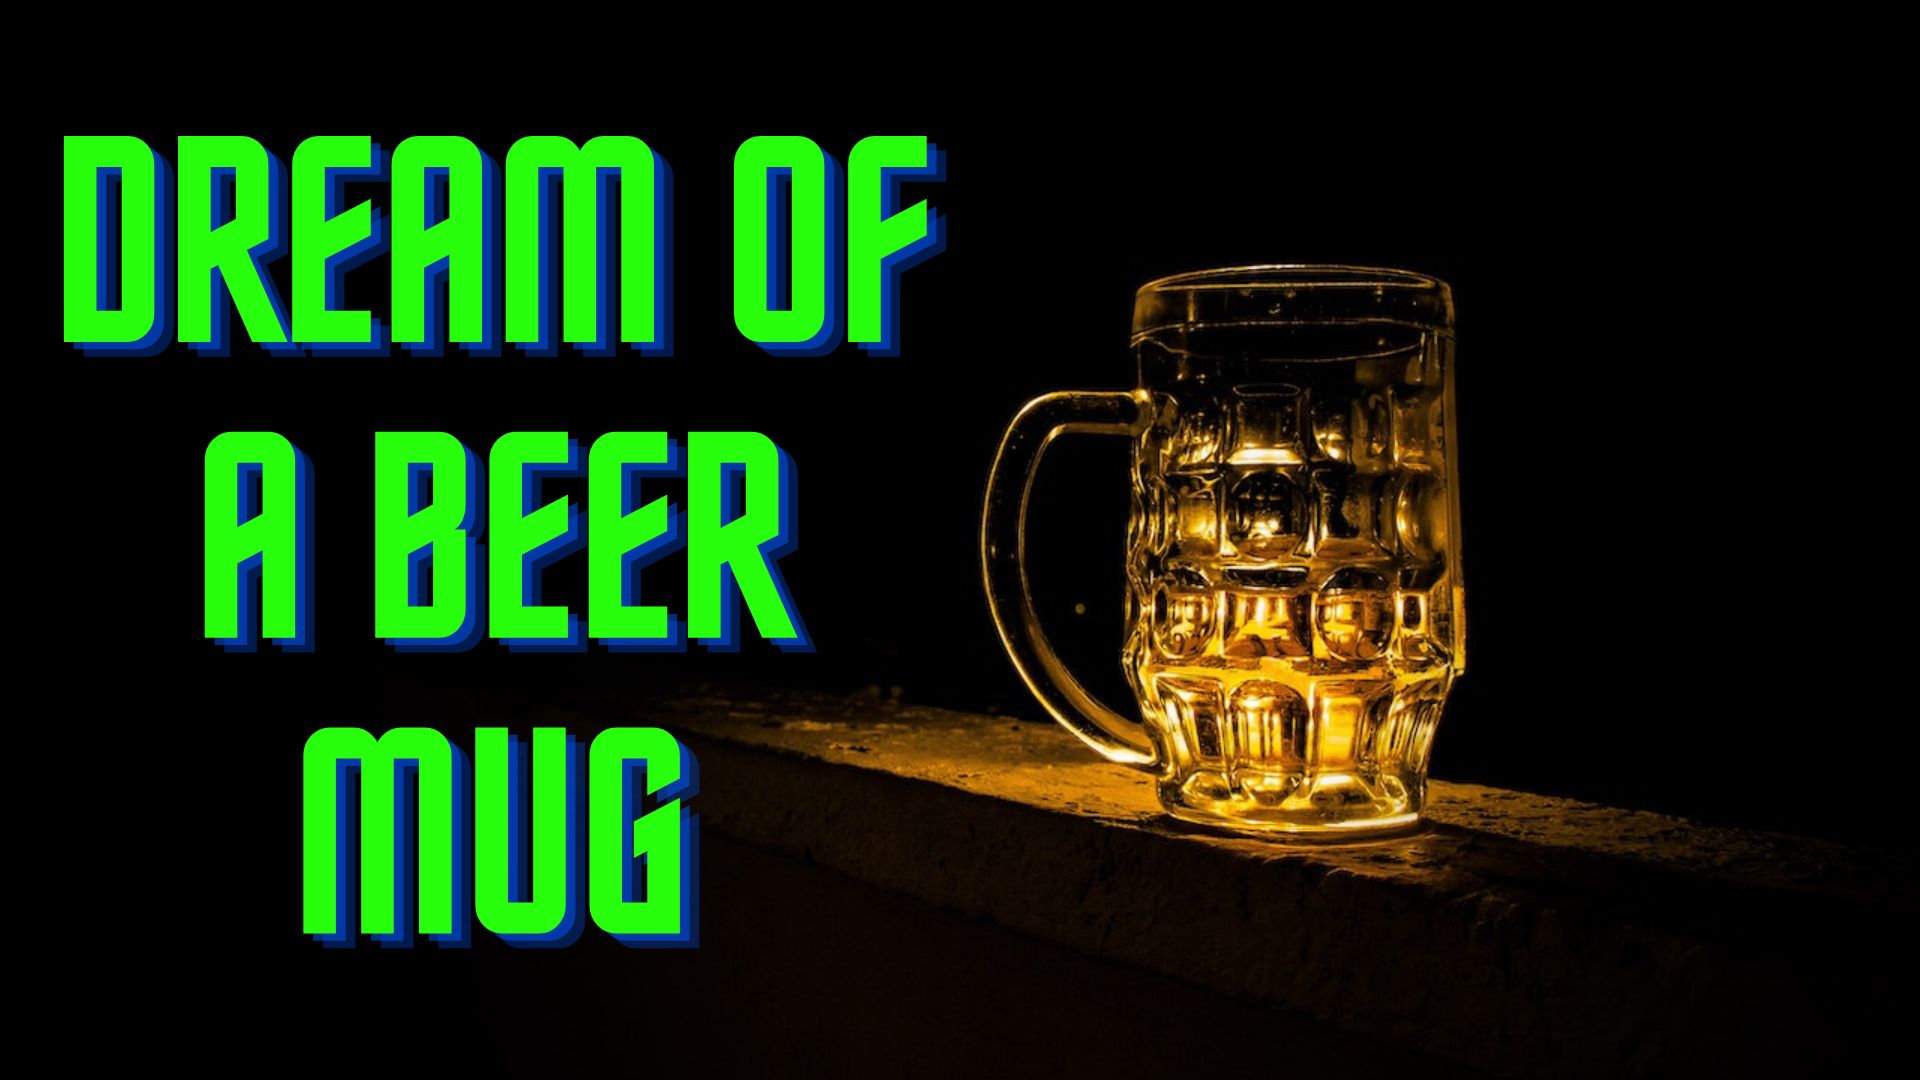 Dream Of A Beer Mug - Free From Complications